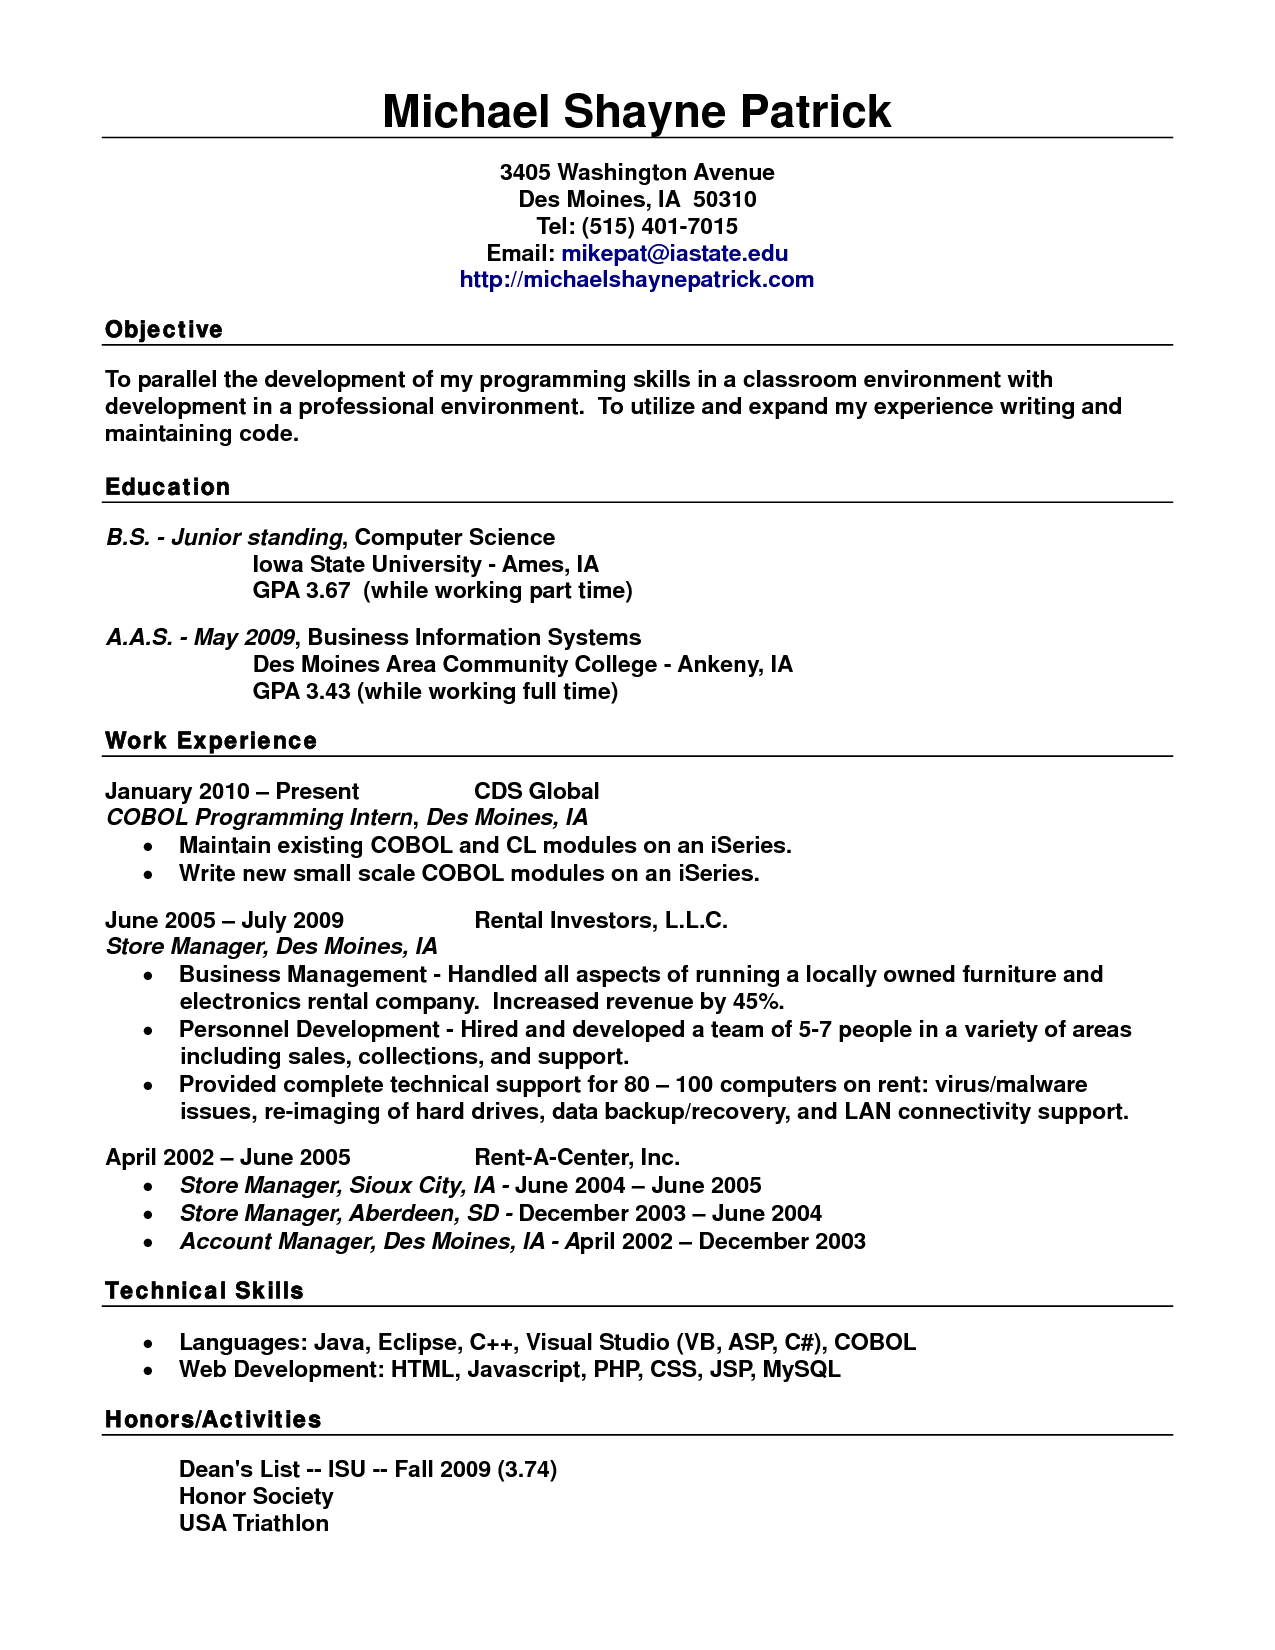 standard resume formats yun56co resume format template best cover